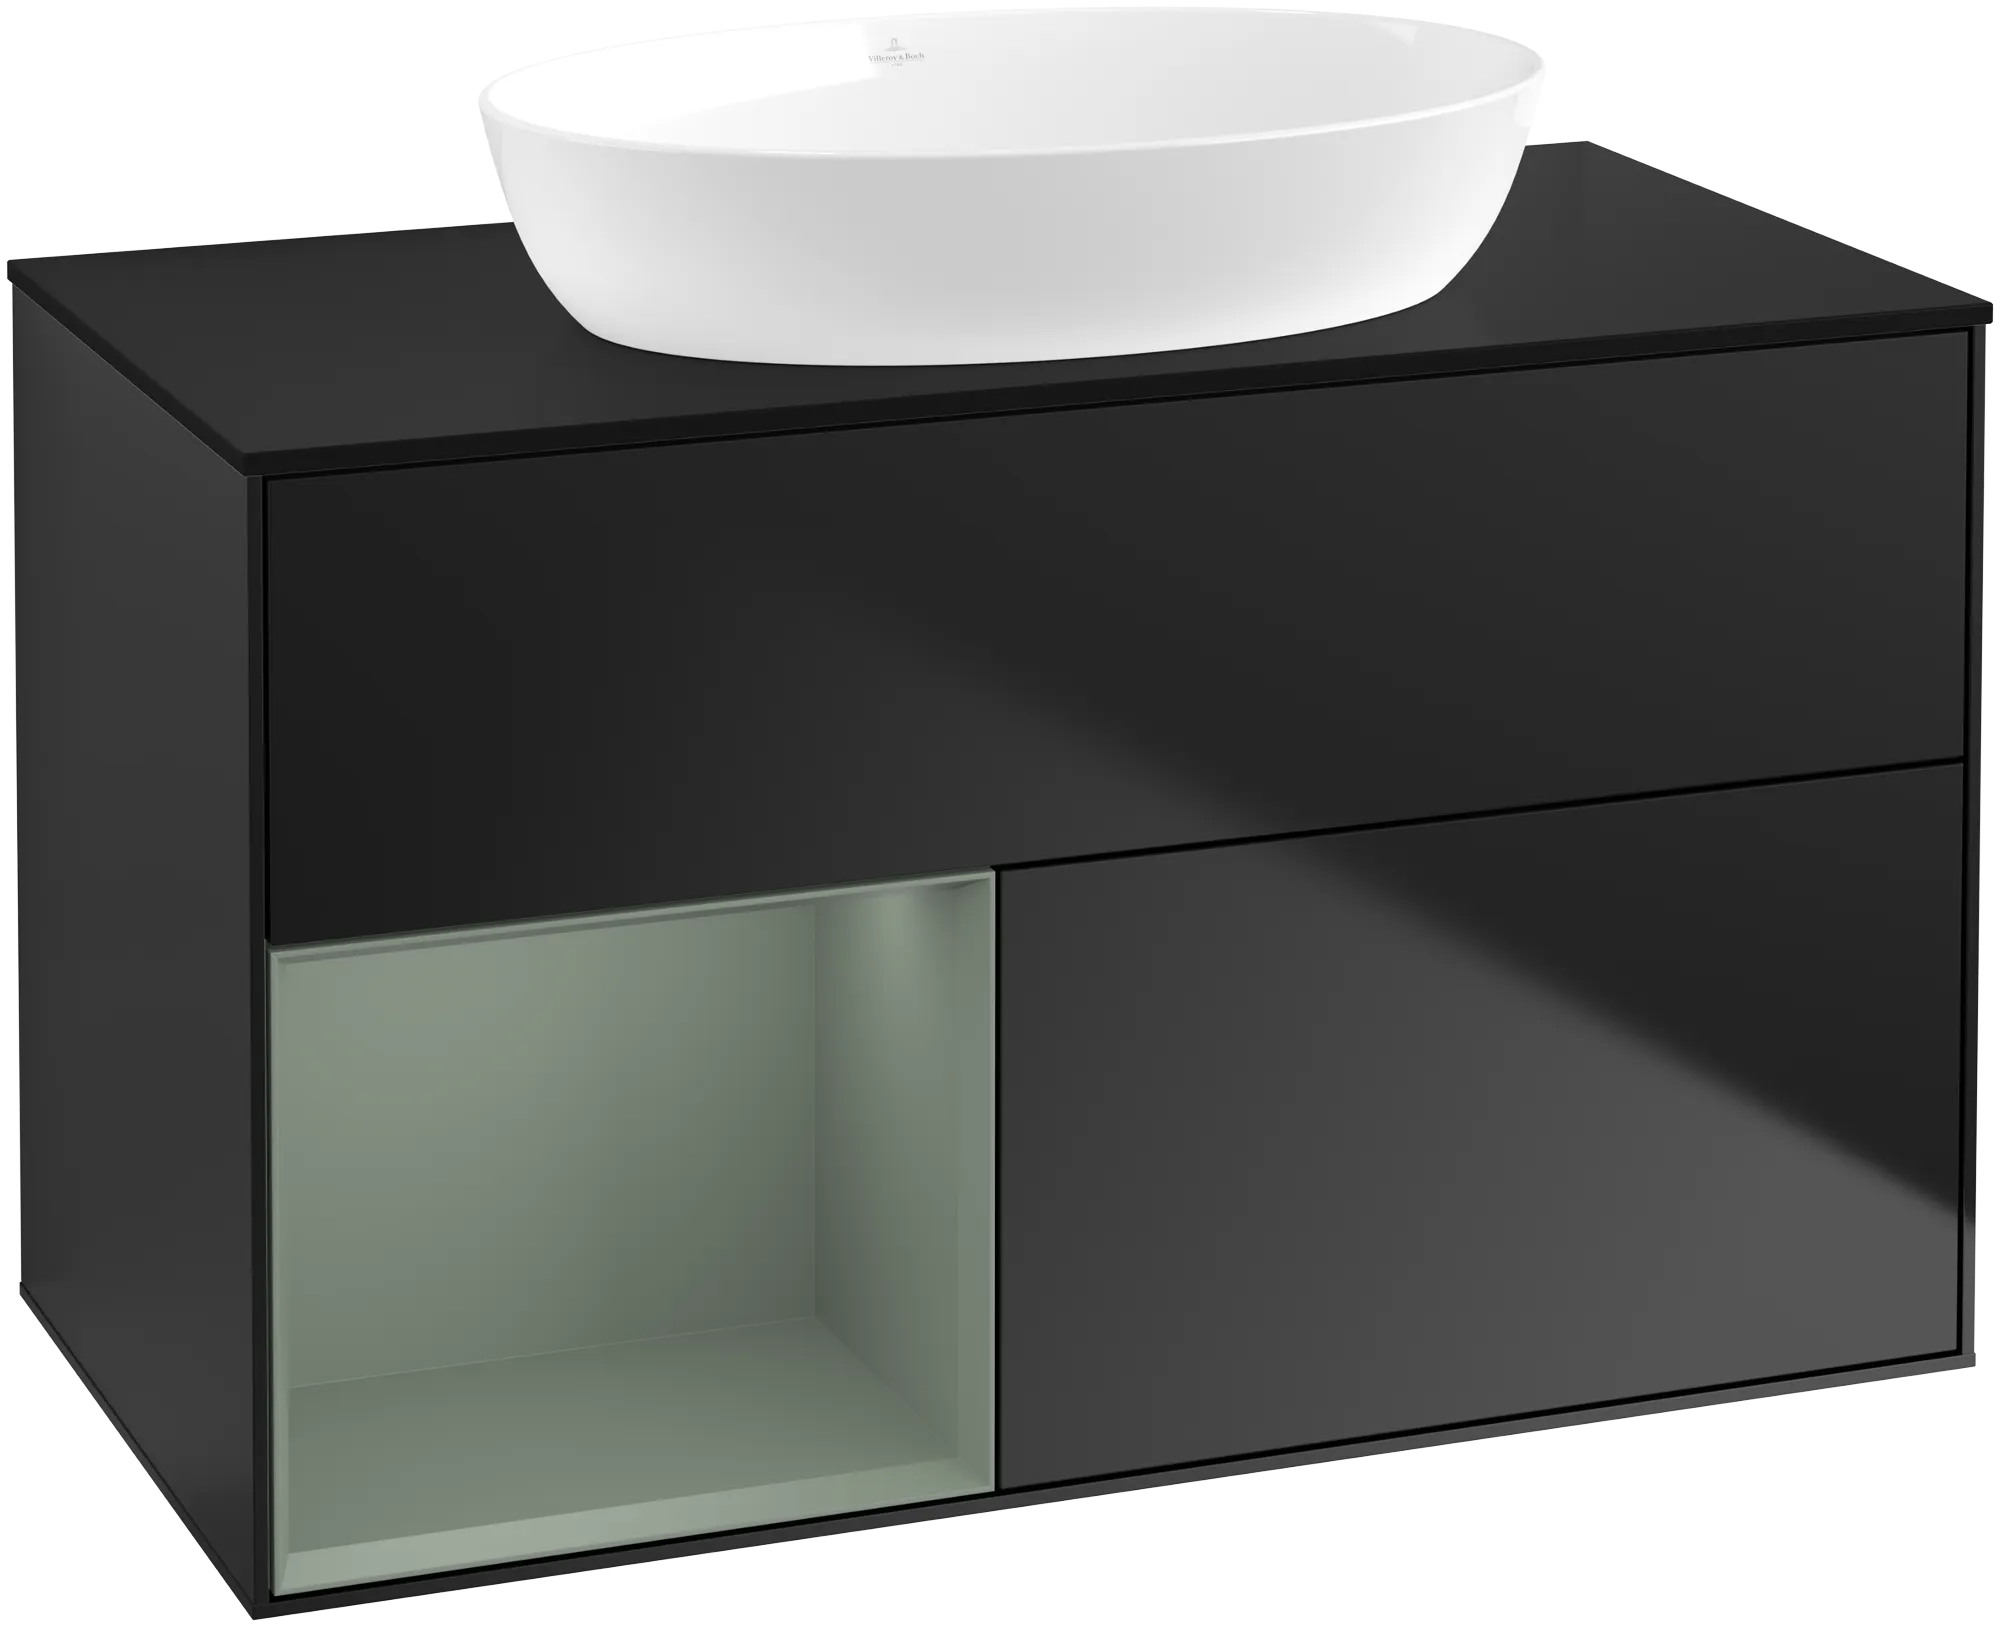 VILLEROY BOCH Finion Vanity unit, with lighting, 2 pull-out compartments, 1000 x 603 x 501 mm, Black Matt Lacquer / Olive Matt Lacquer / Glass Black Matt #GA12GMPD resmi